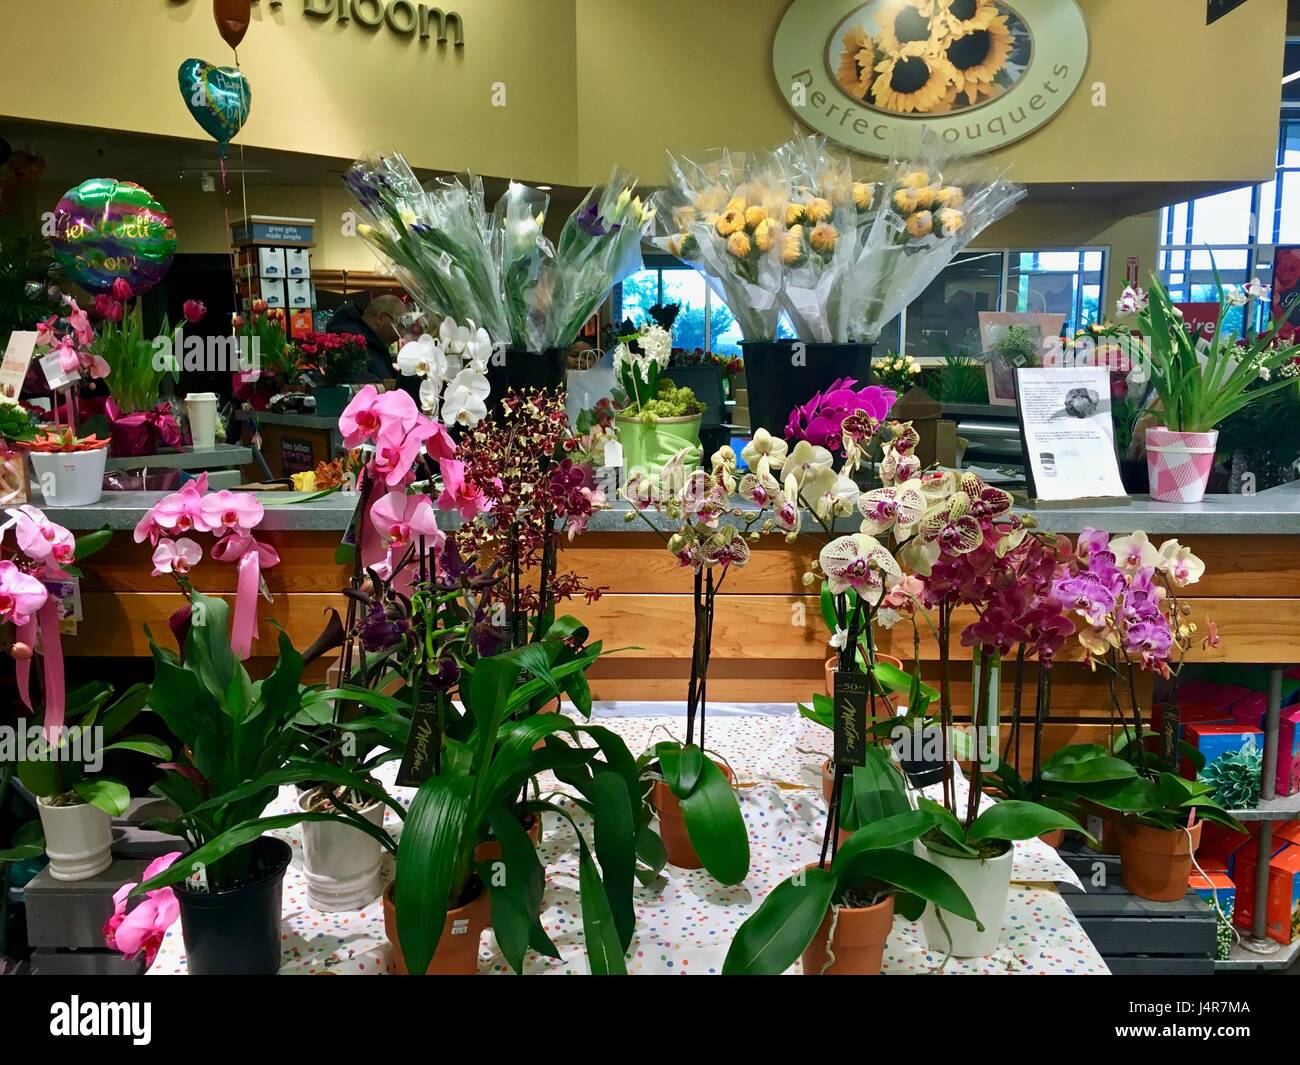 Maryland, USA - May 13, 2017: Floral arrangements, flowers, and plants at Safeway the night before mothers day. Photo credit: Jeramey Lende/Alamy Live News Stock Photo